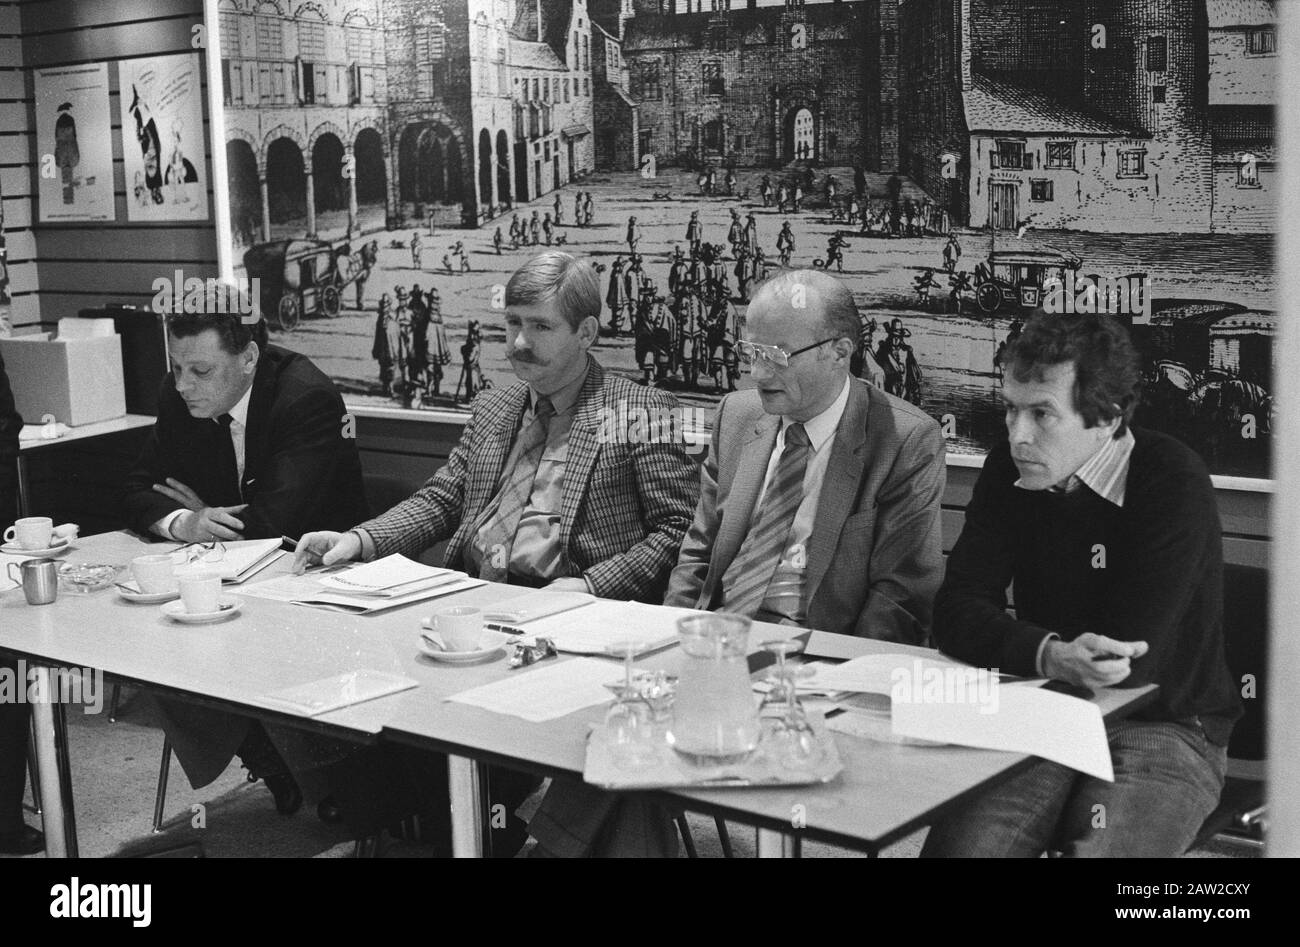 Press conference in Nieuwspoort Energy Research cents Netherlands on solar water heaters Date: December 18, 1980 Location: Netherlands Keywords: press conferences Institution Name: Nieuwspoort Stock Photo